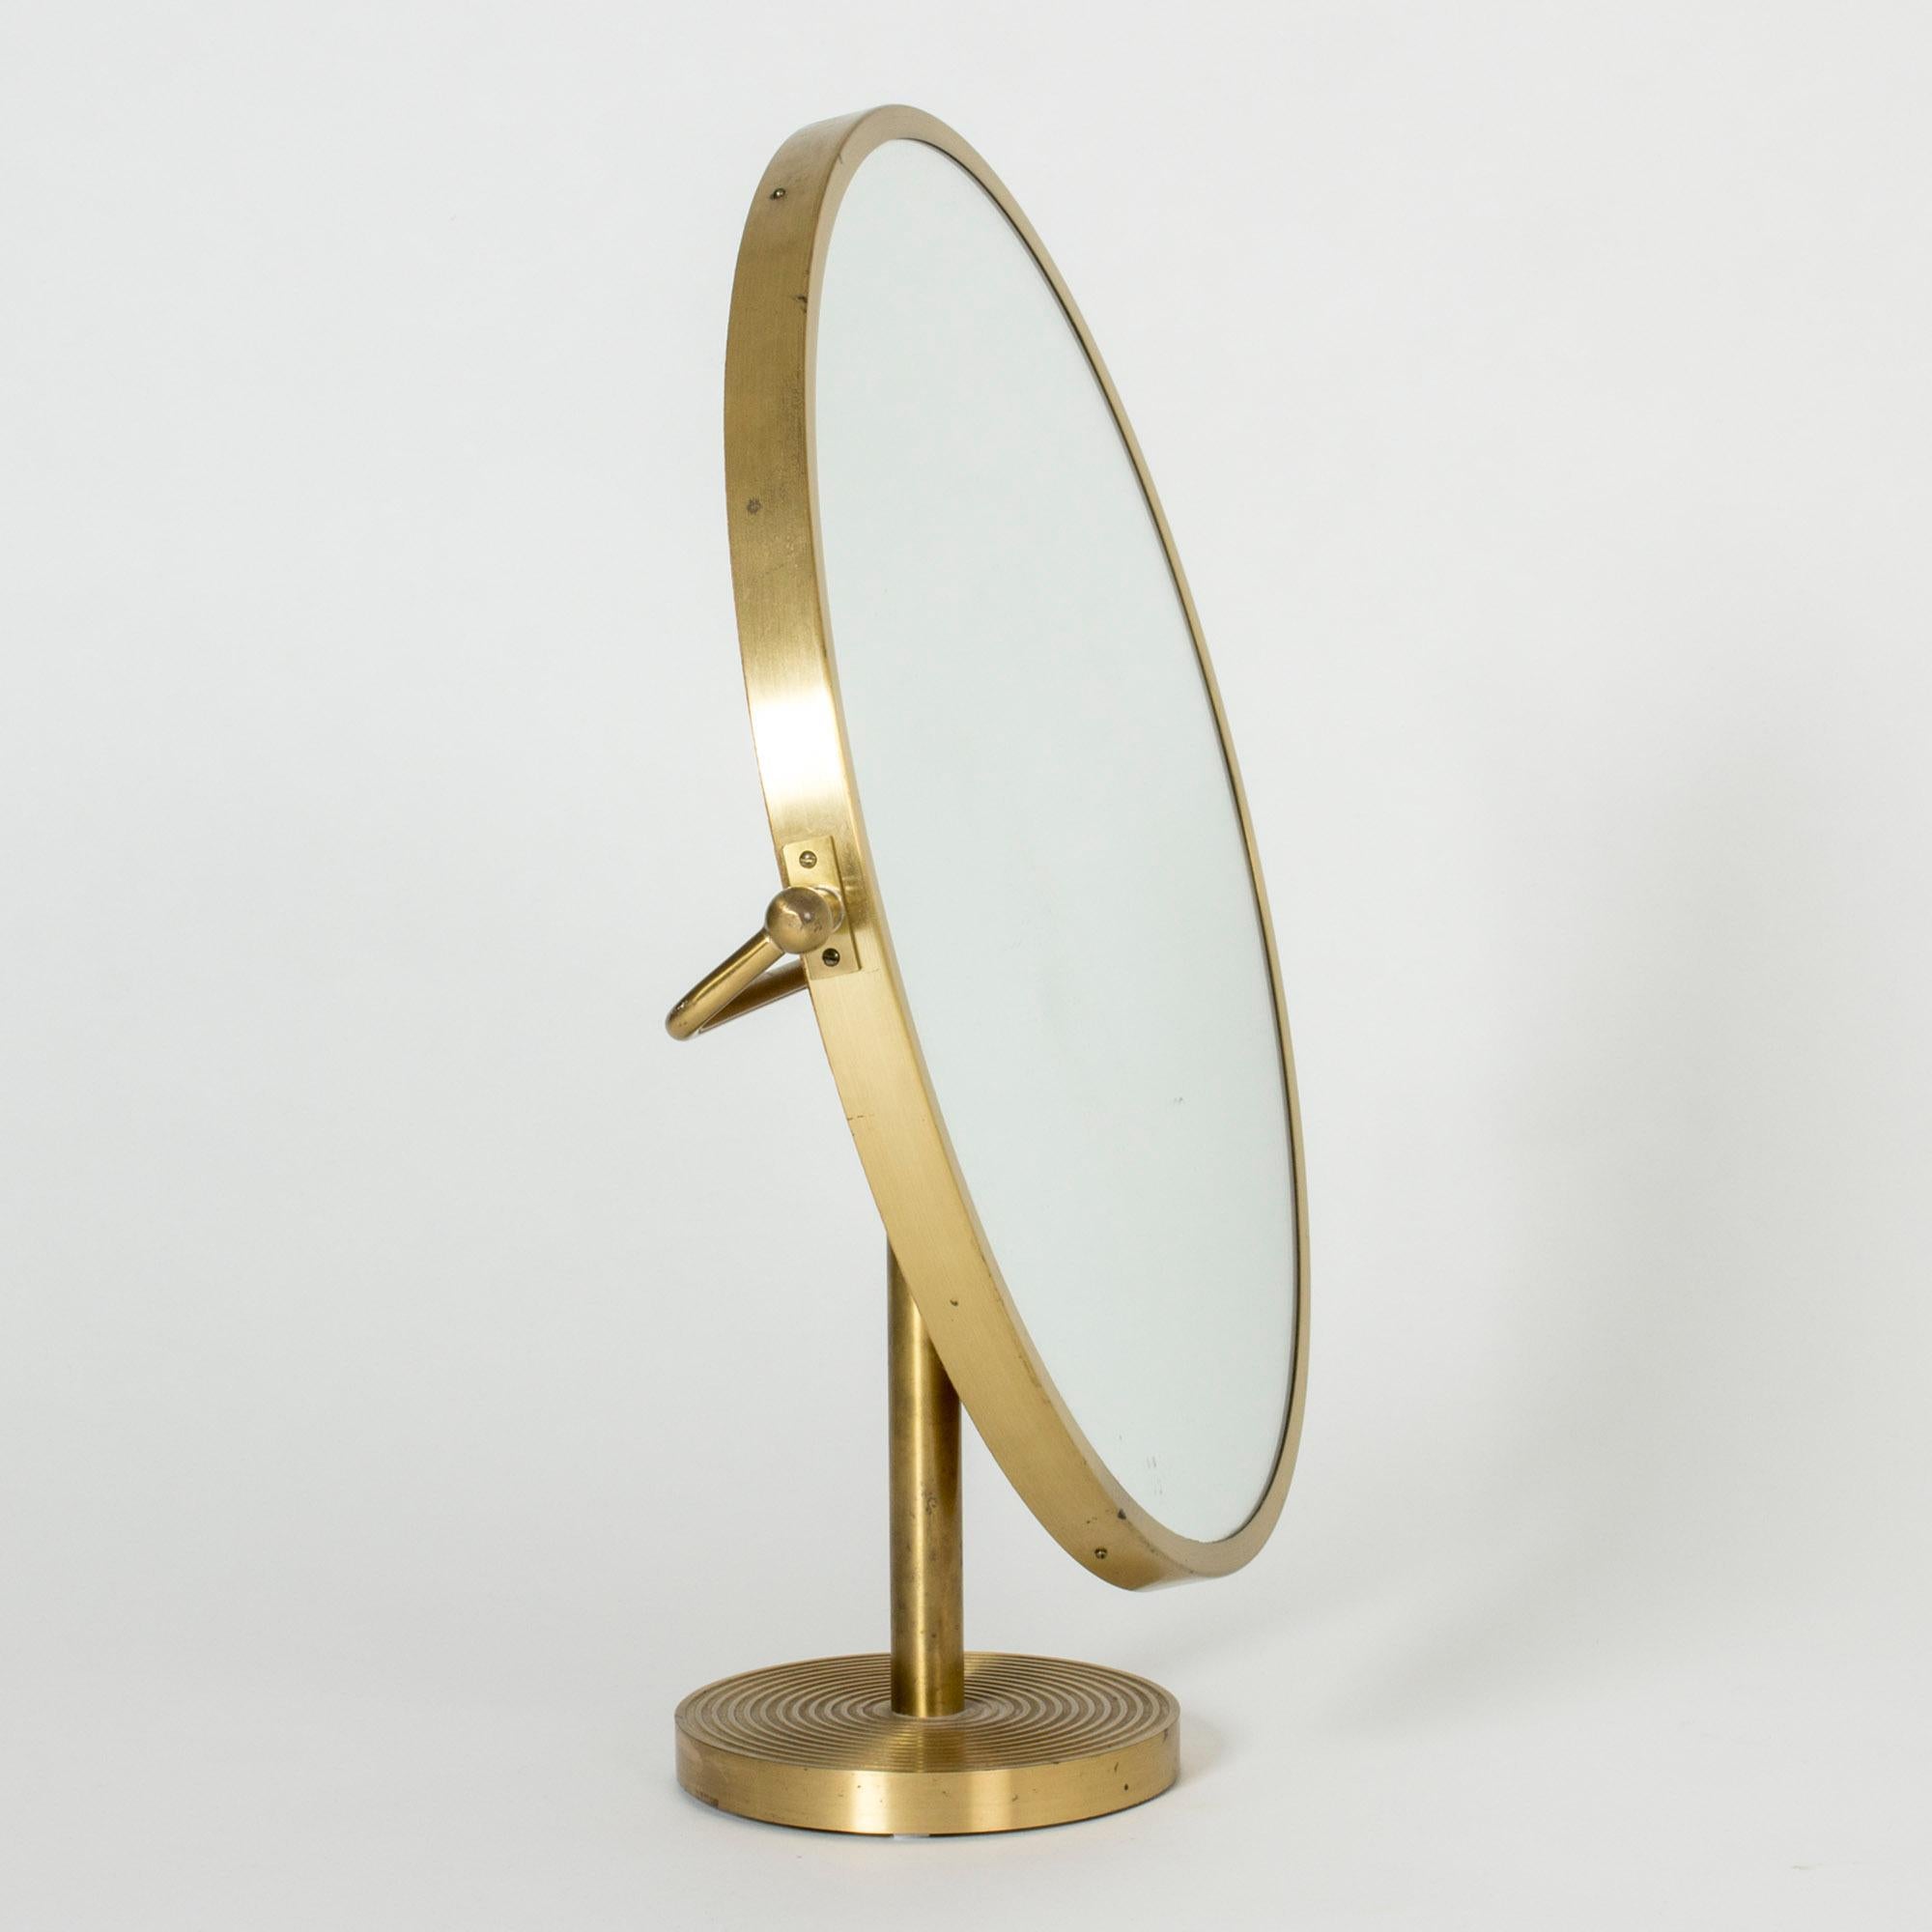 Oversized, round brass table mirror by Josef Frank. Clean, elegant lines. Beautiful embossed pattern of stripes on the base of the mirror, wooden back.